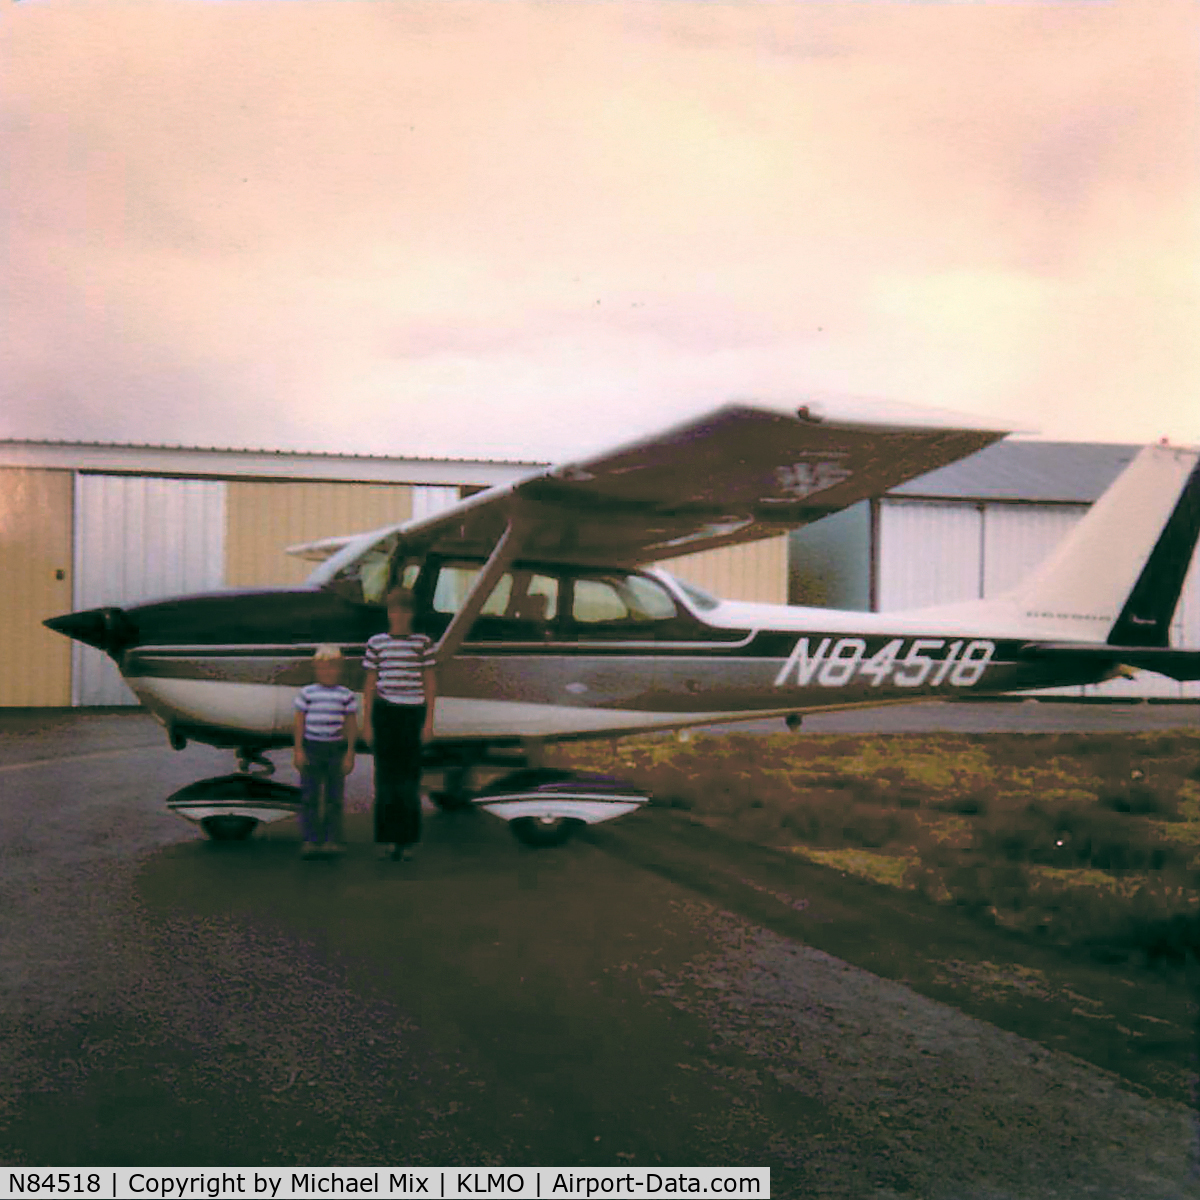 N84518, 1969 Cessna 172K Skyhawk C/N 17258509, Mid-'70s picture of N84518 taken at Longmont Municipal Airport in Colorado. Now known as Vance Brand Municipal (KLMO)